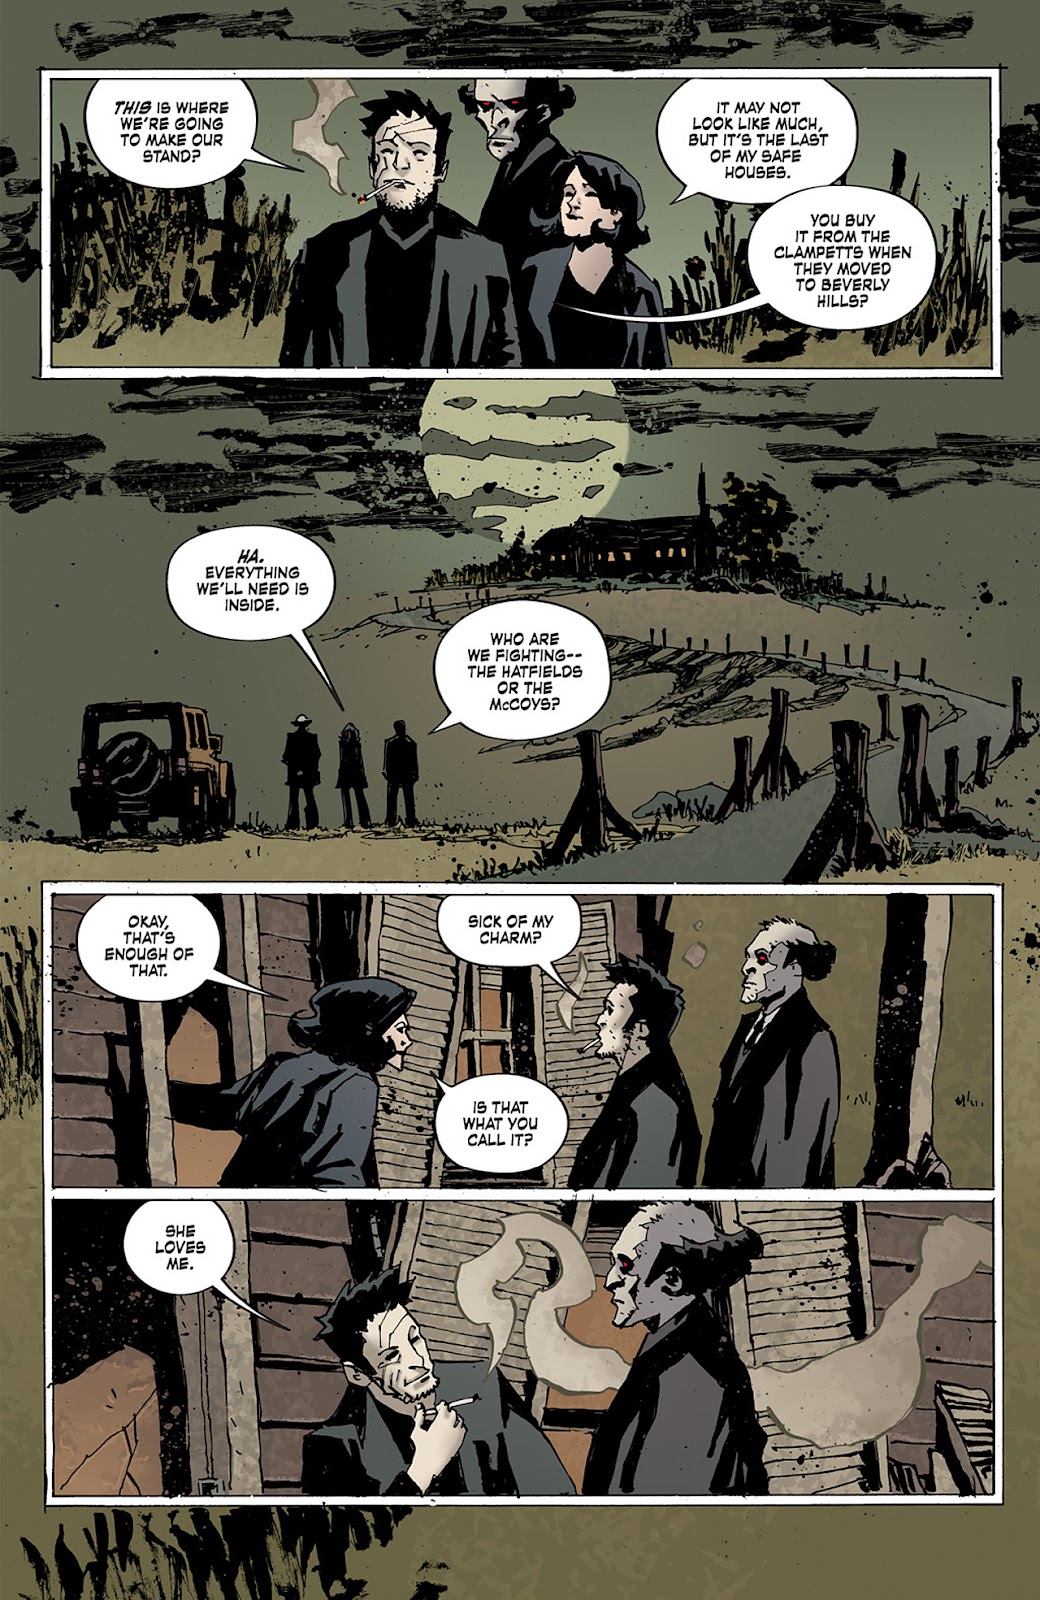 Criminal Macabre: Final Night - The 30 Days of Night Crossover issue 3 - Page 7